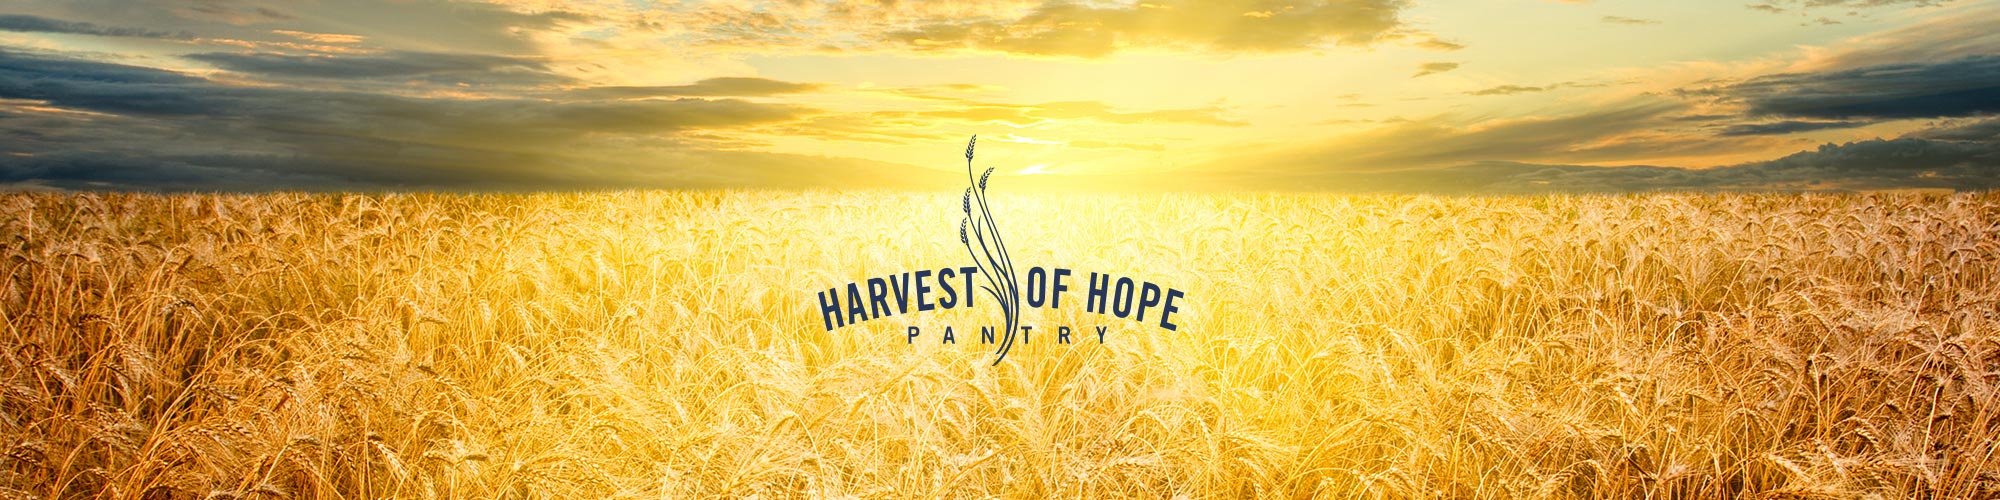 Harvest of Hope Pantry | 2016 Annual Report